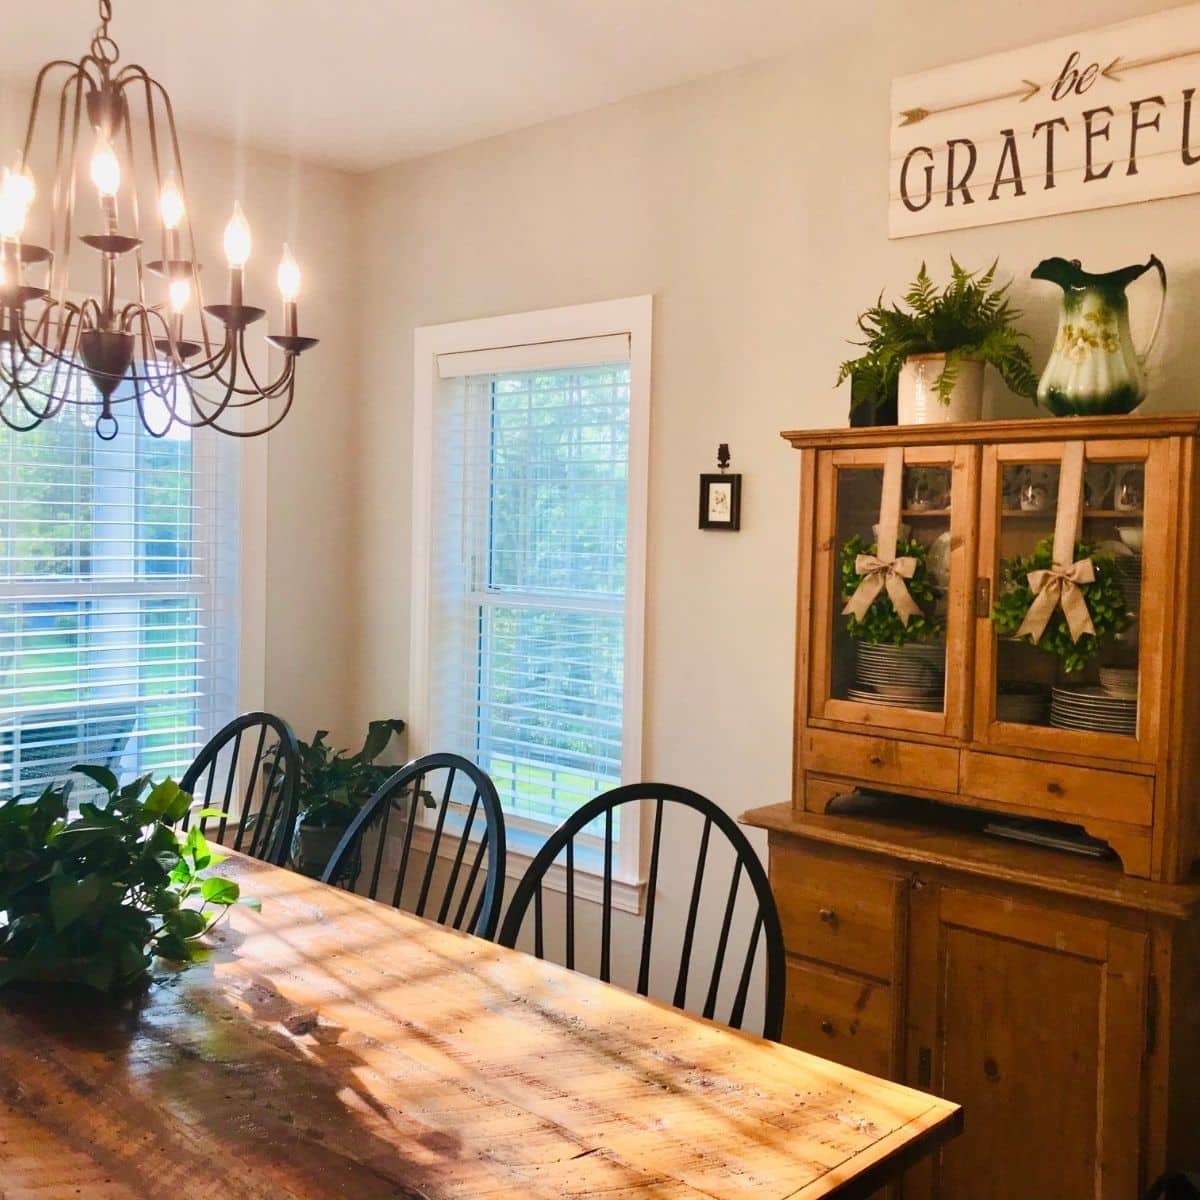 What Are Some Affordable Farmhouse Decor Ideas